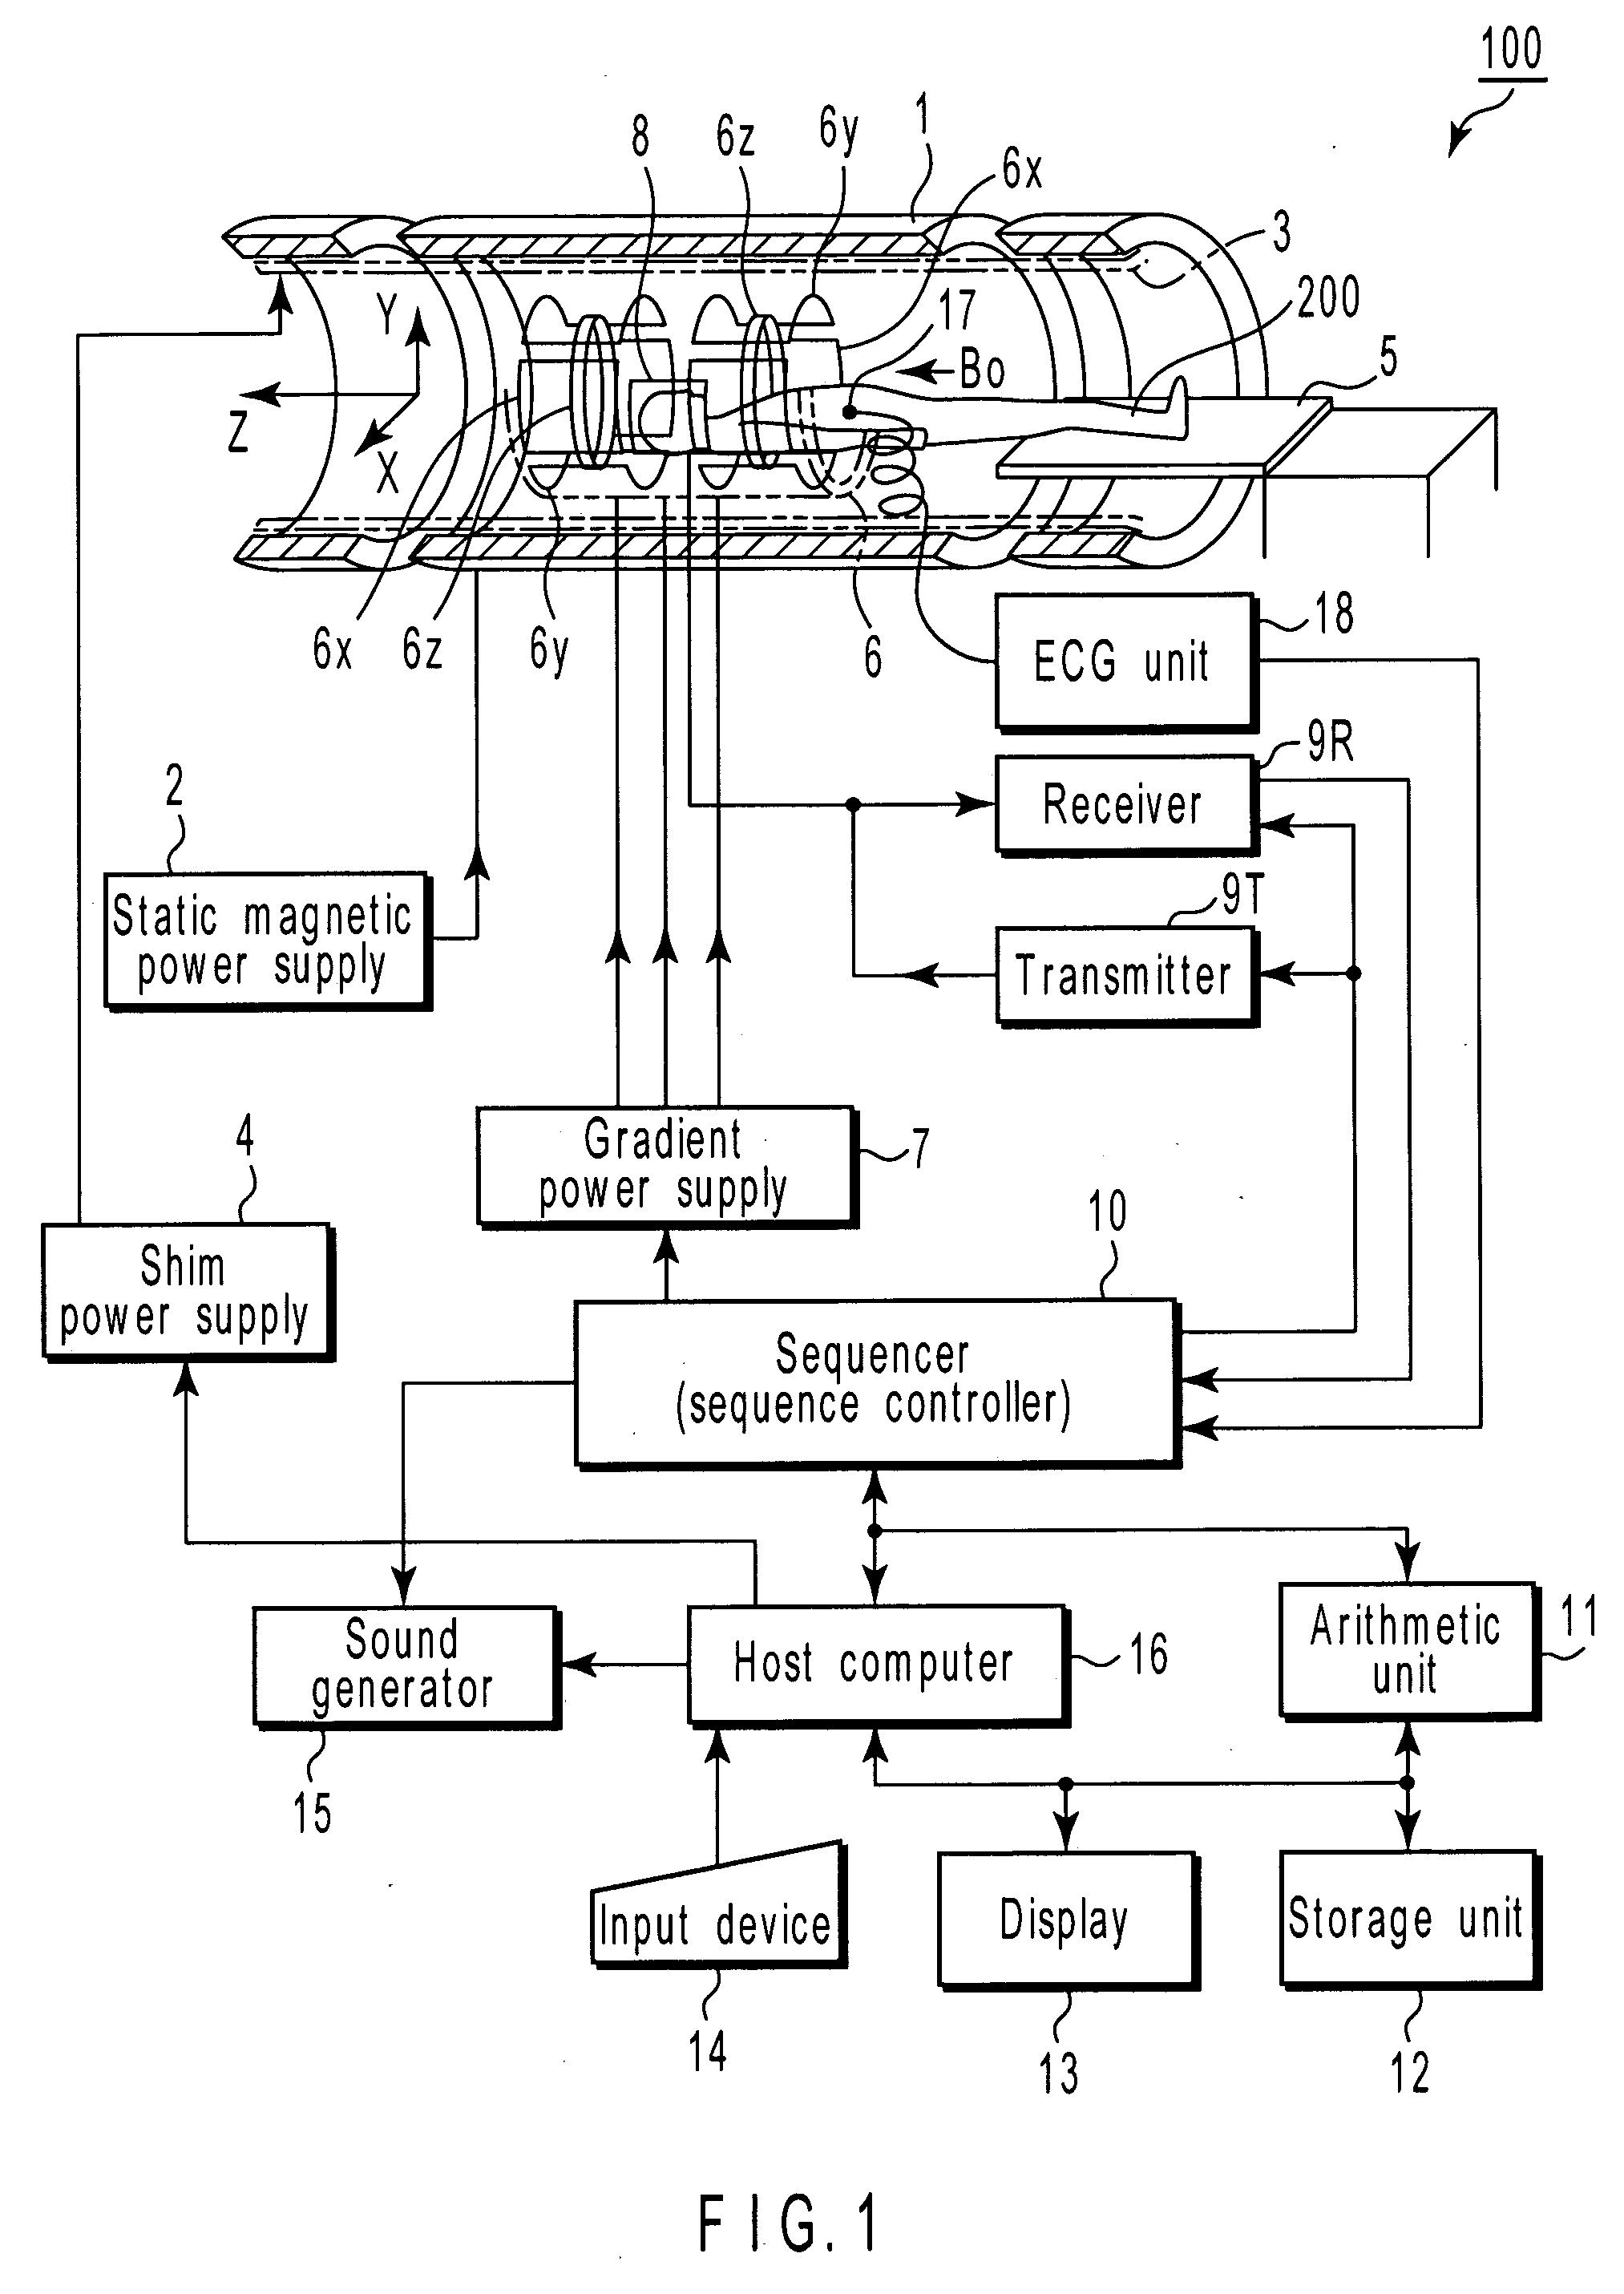 Magnetic-resonance image diagnostic apparatus and method of controlling the same